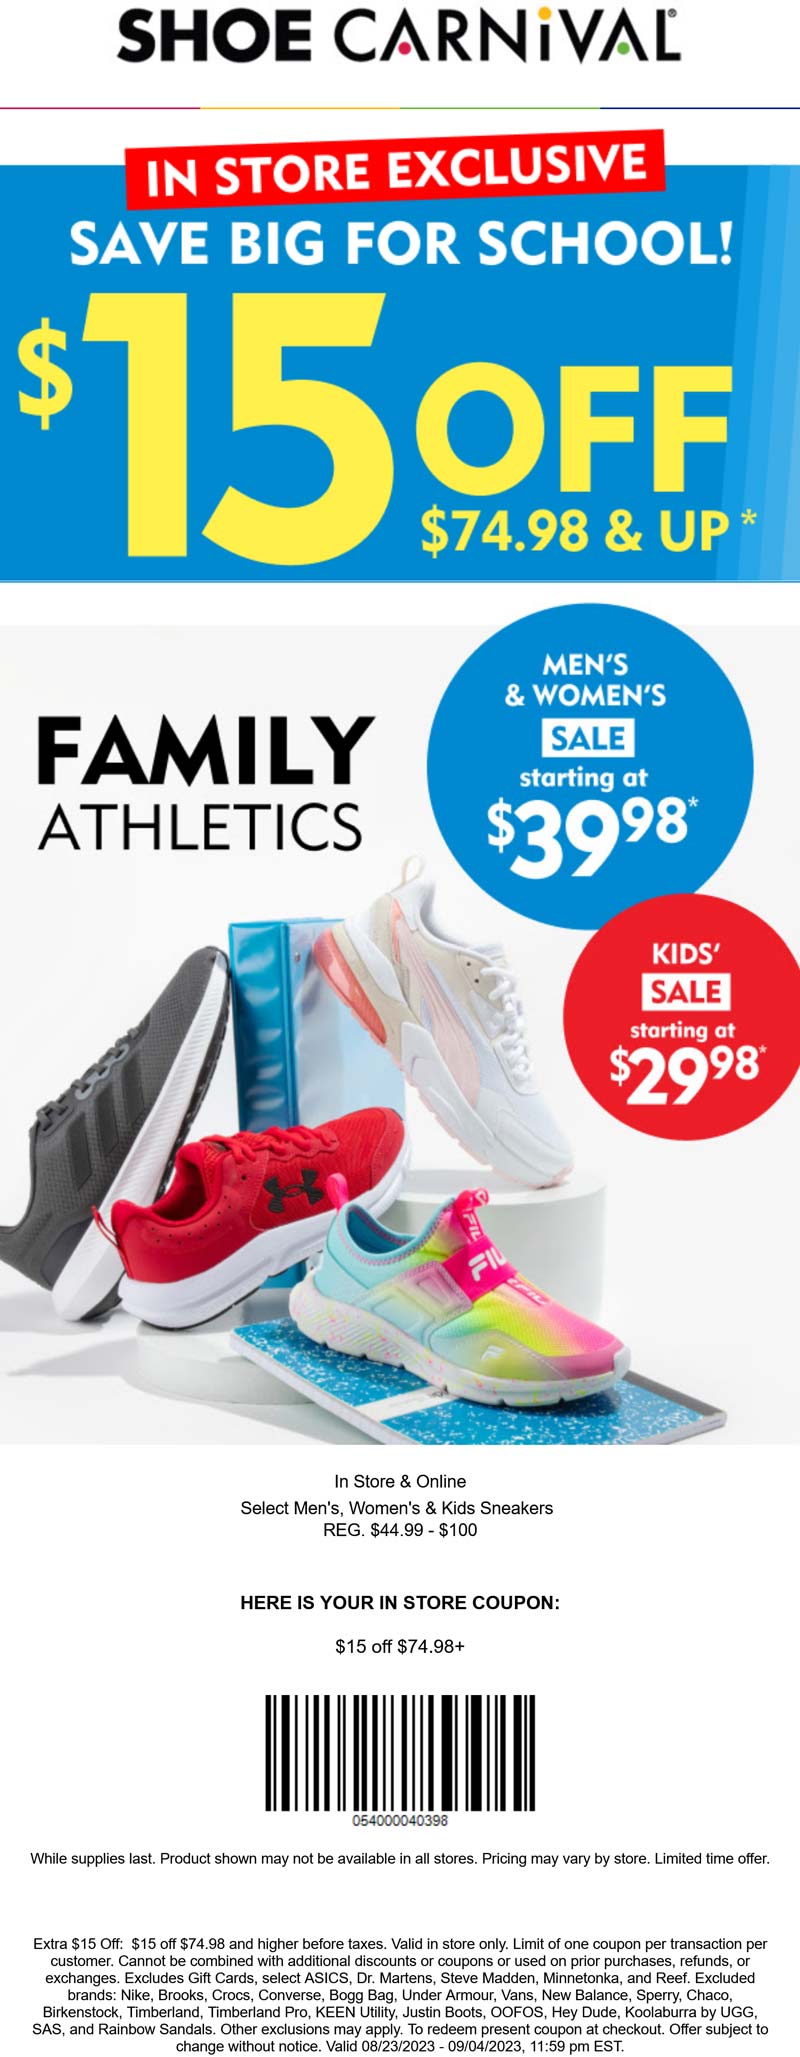 Shoe Carnival stores Coupon  $15 off $75 at Shoe Carnival #shoecarnival 